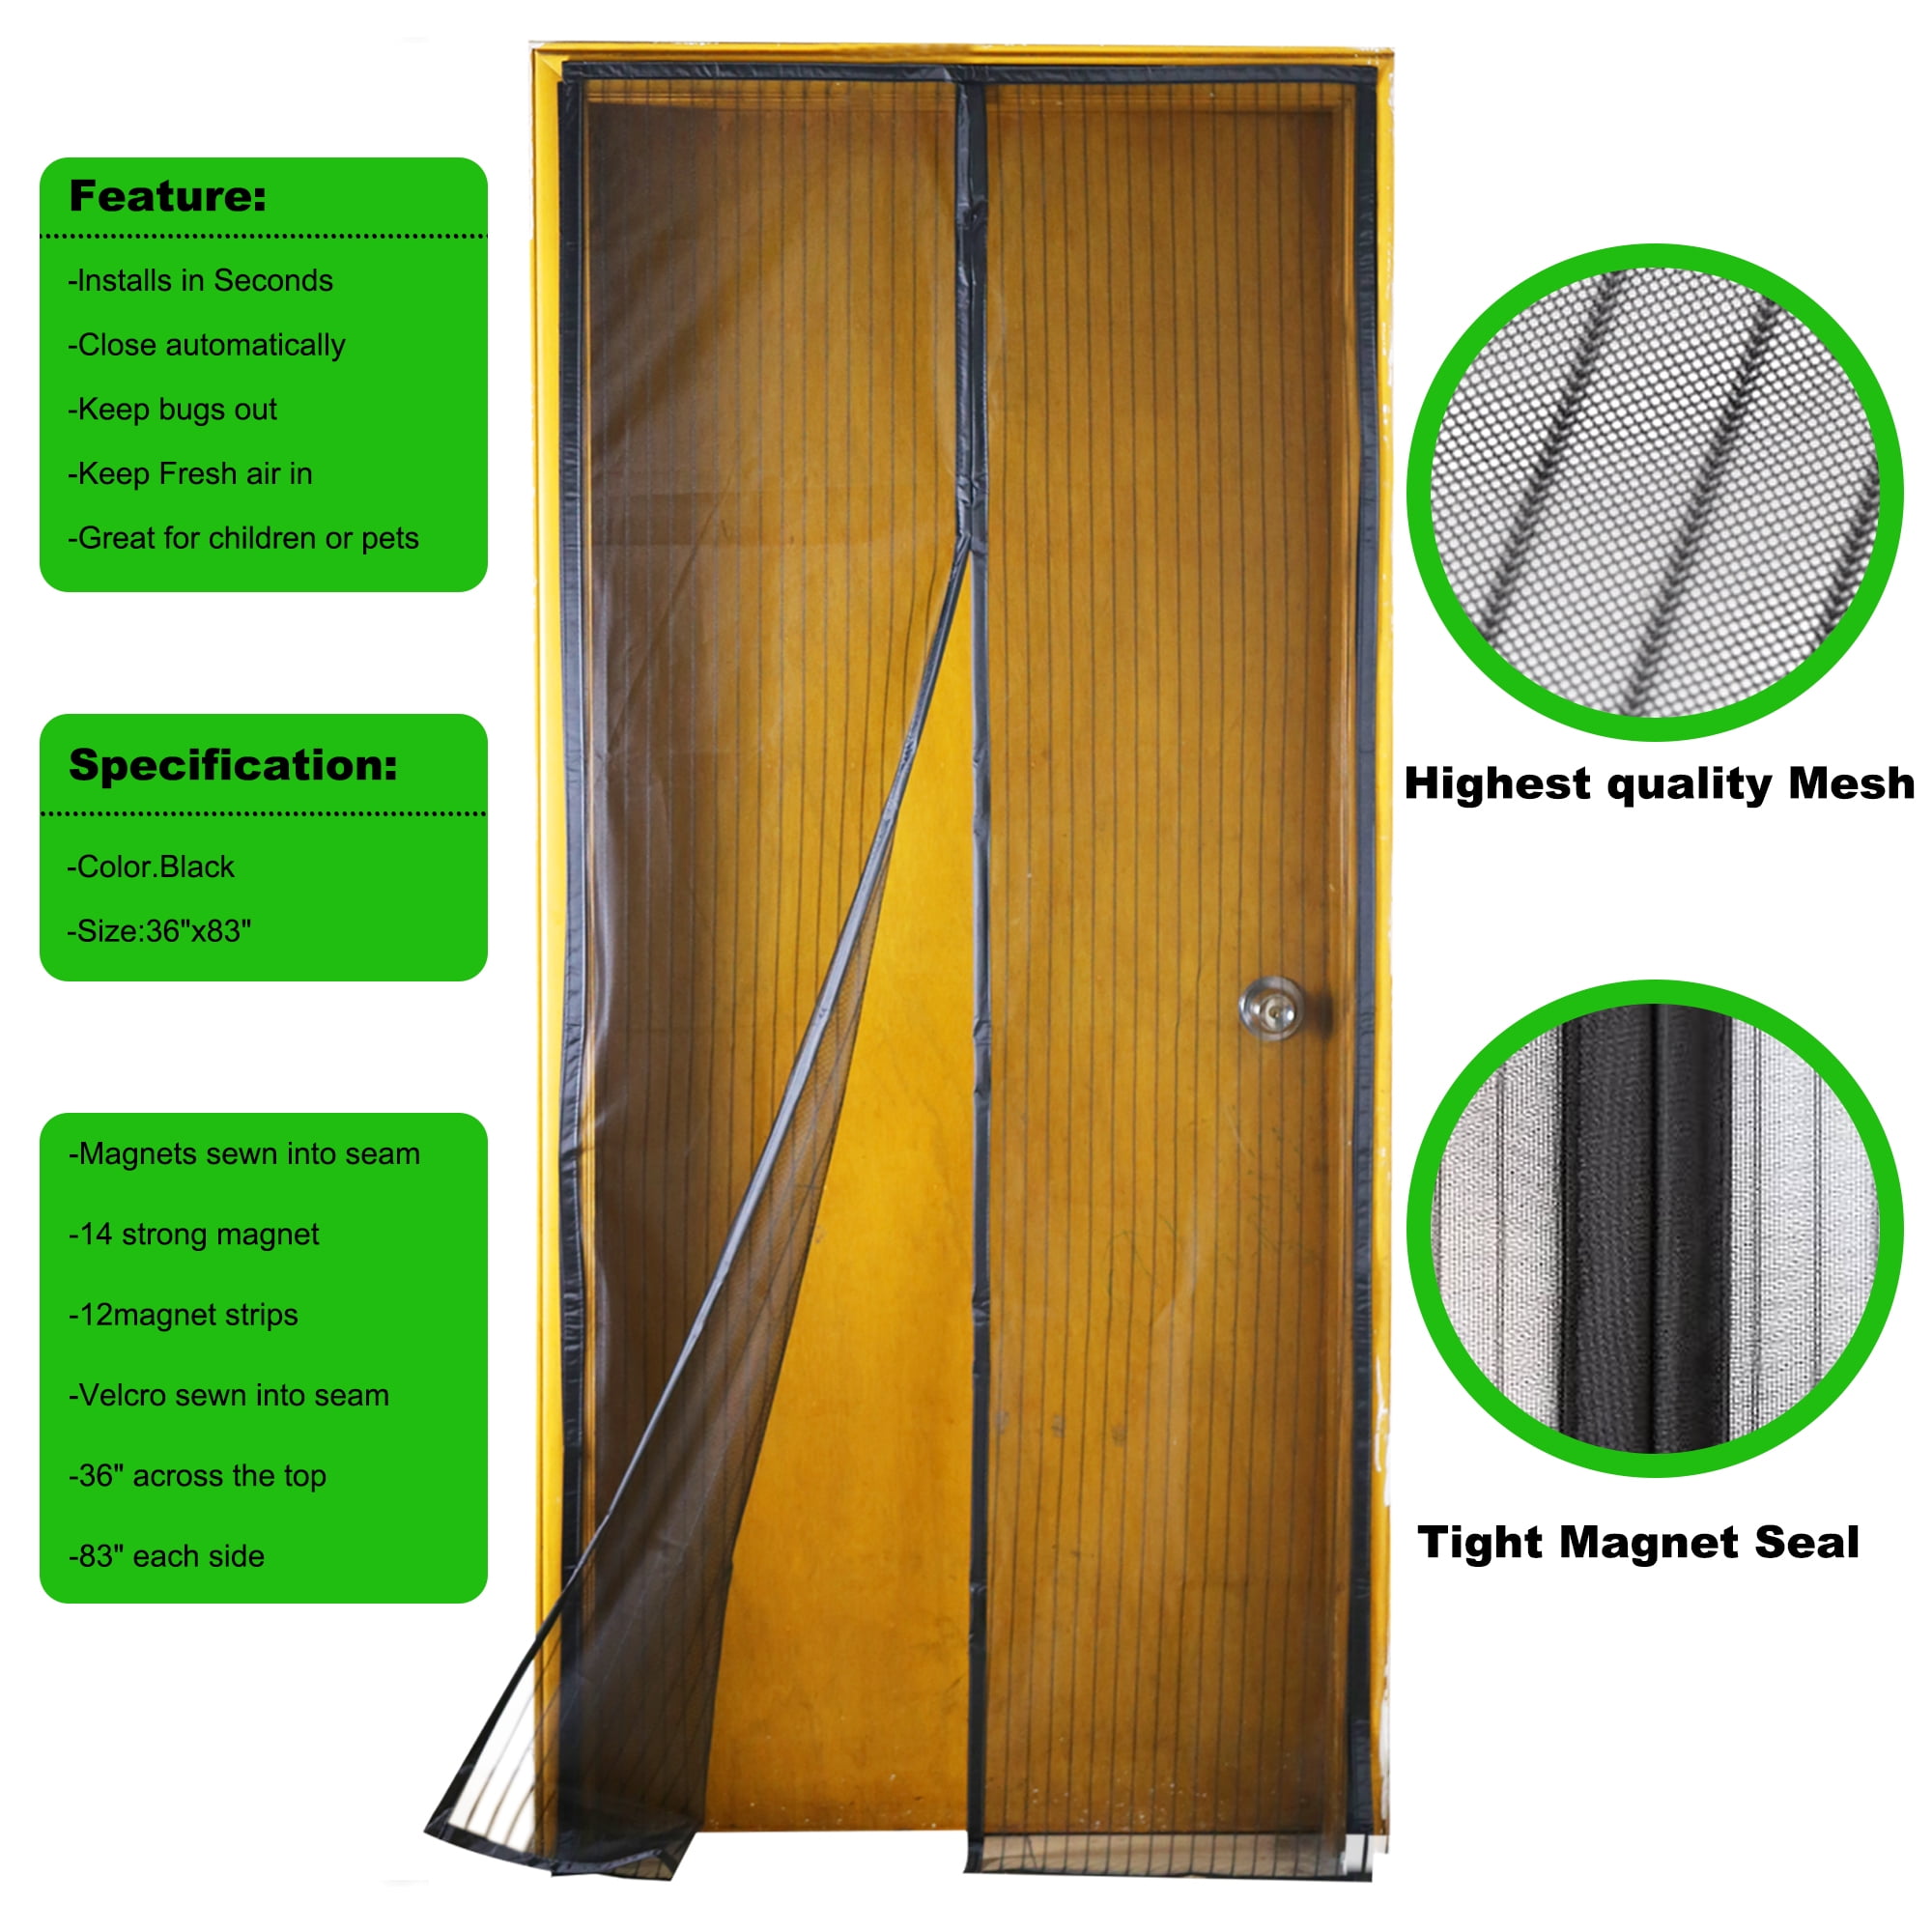 MYCARBON Magnetic Fly Screen Door Keep Insects Bug Out Mosquito 90x210cm Door Screen Curtain Net Automatic Closing Easy to Install without Drilling for Balcony Sliding Living Room Children Room